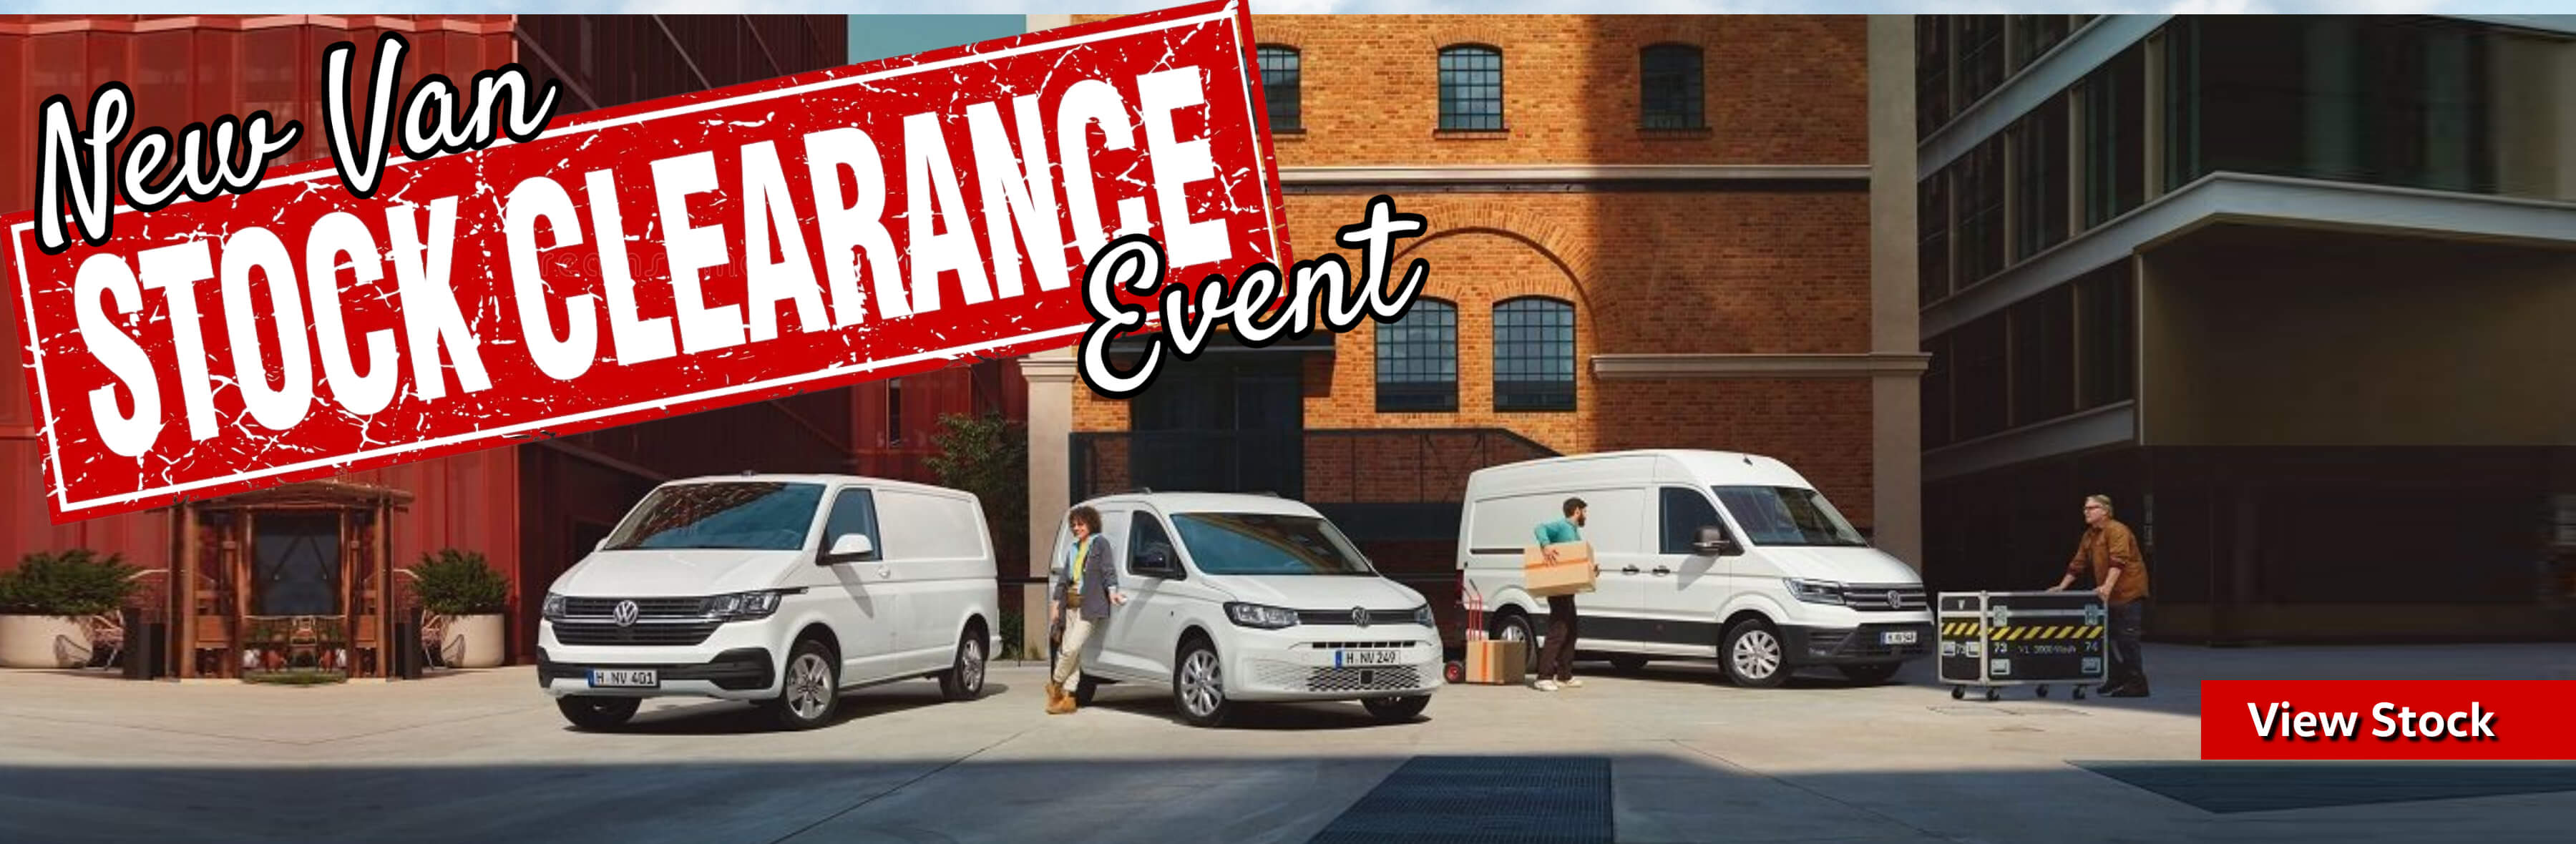 New Van Stock Clearance Event